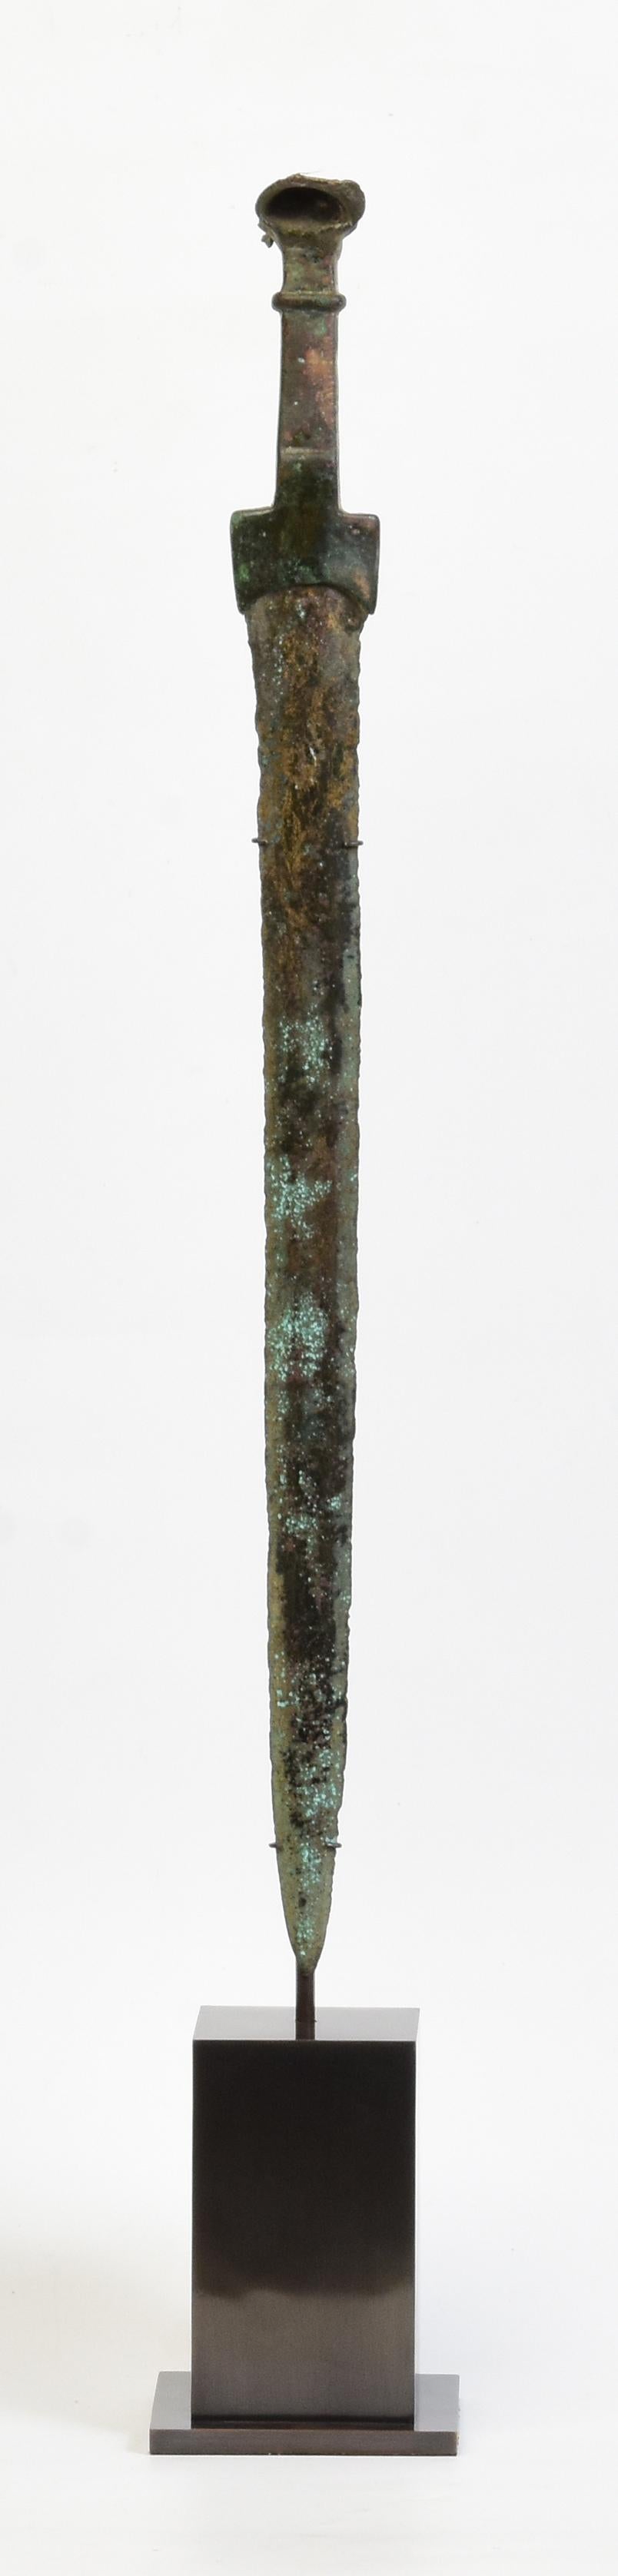 Ancient Antique Luristan Bronze Sword / Knife / Dagger / Early Iron Age Weapon For Sale 1